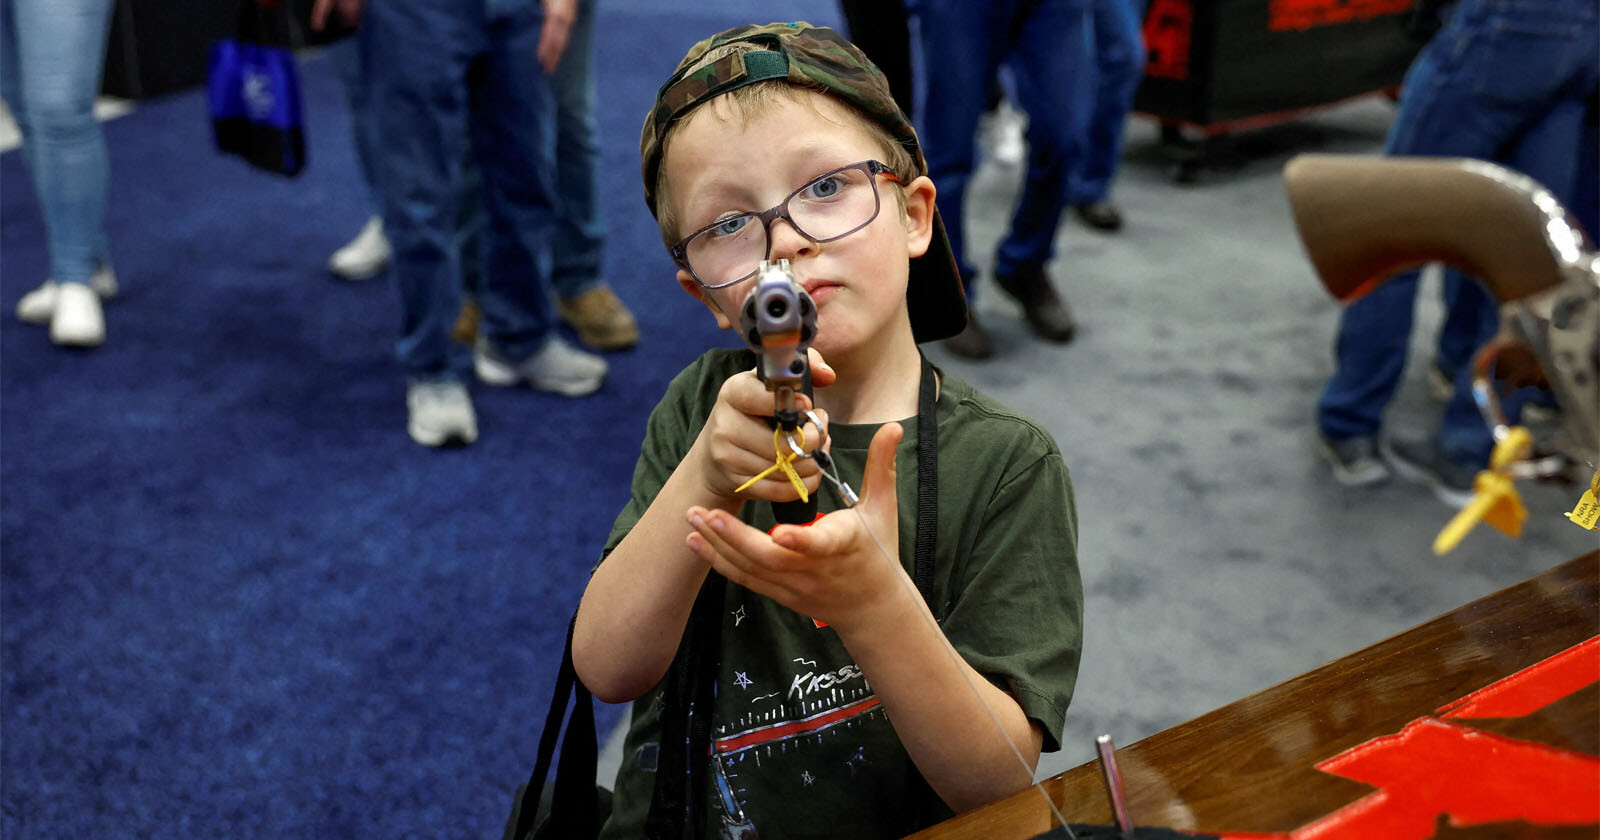 Photo of 6-Year-Old Boy Pointing Gun at Camera at NRA Event Sparks Uproar